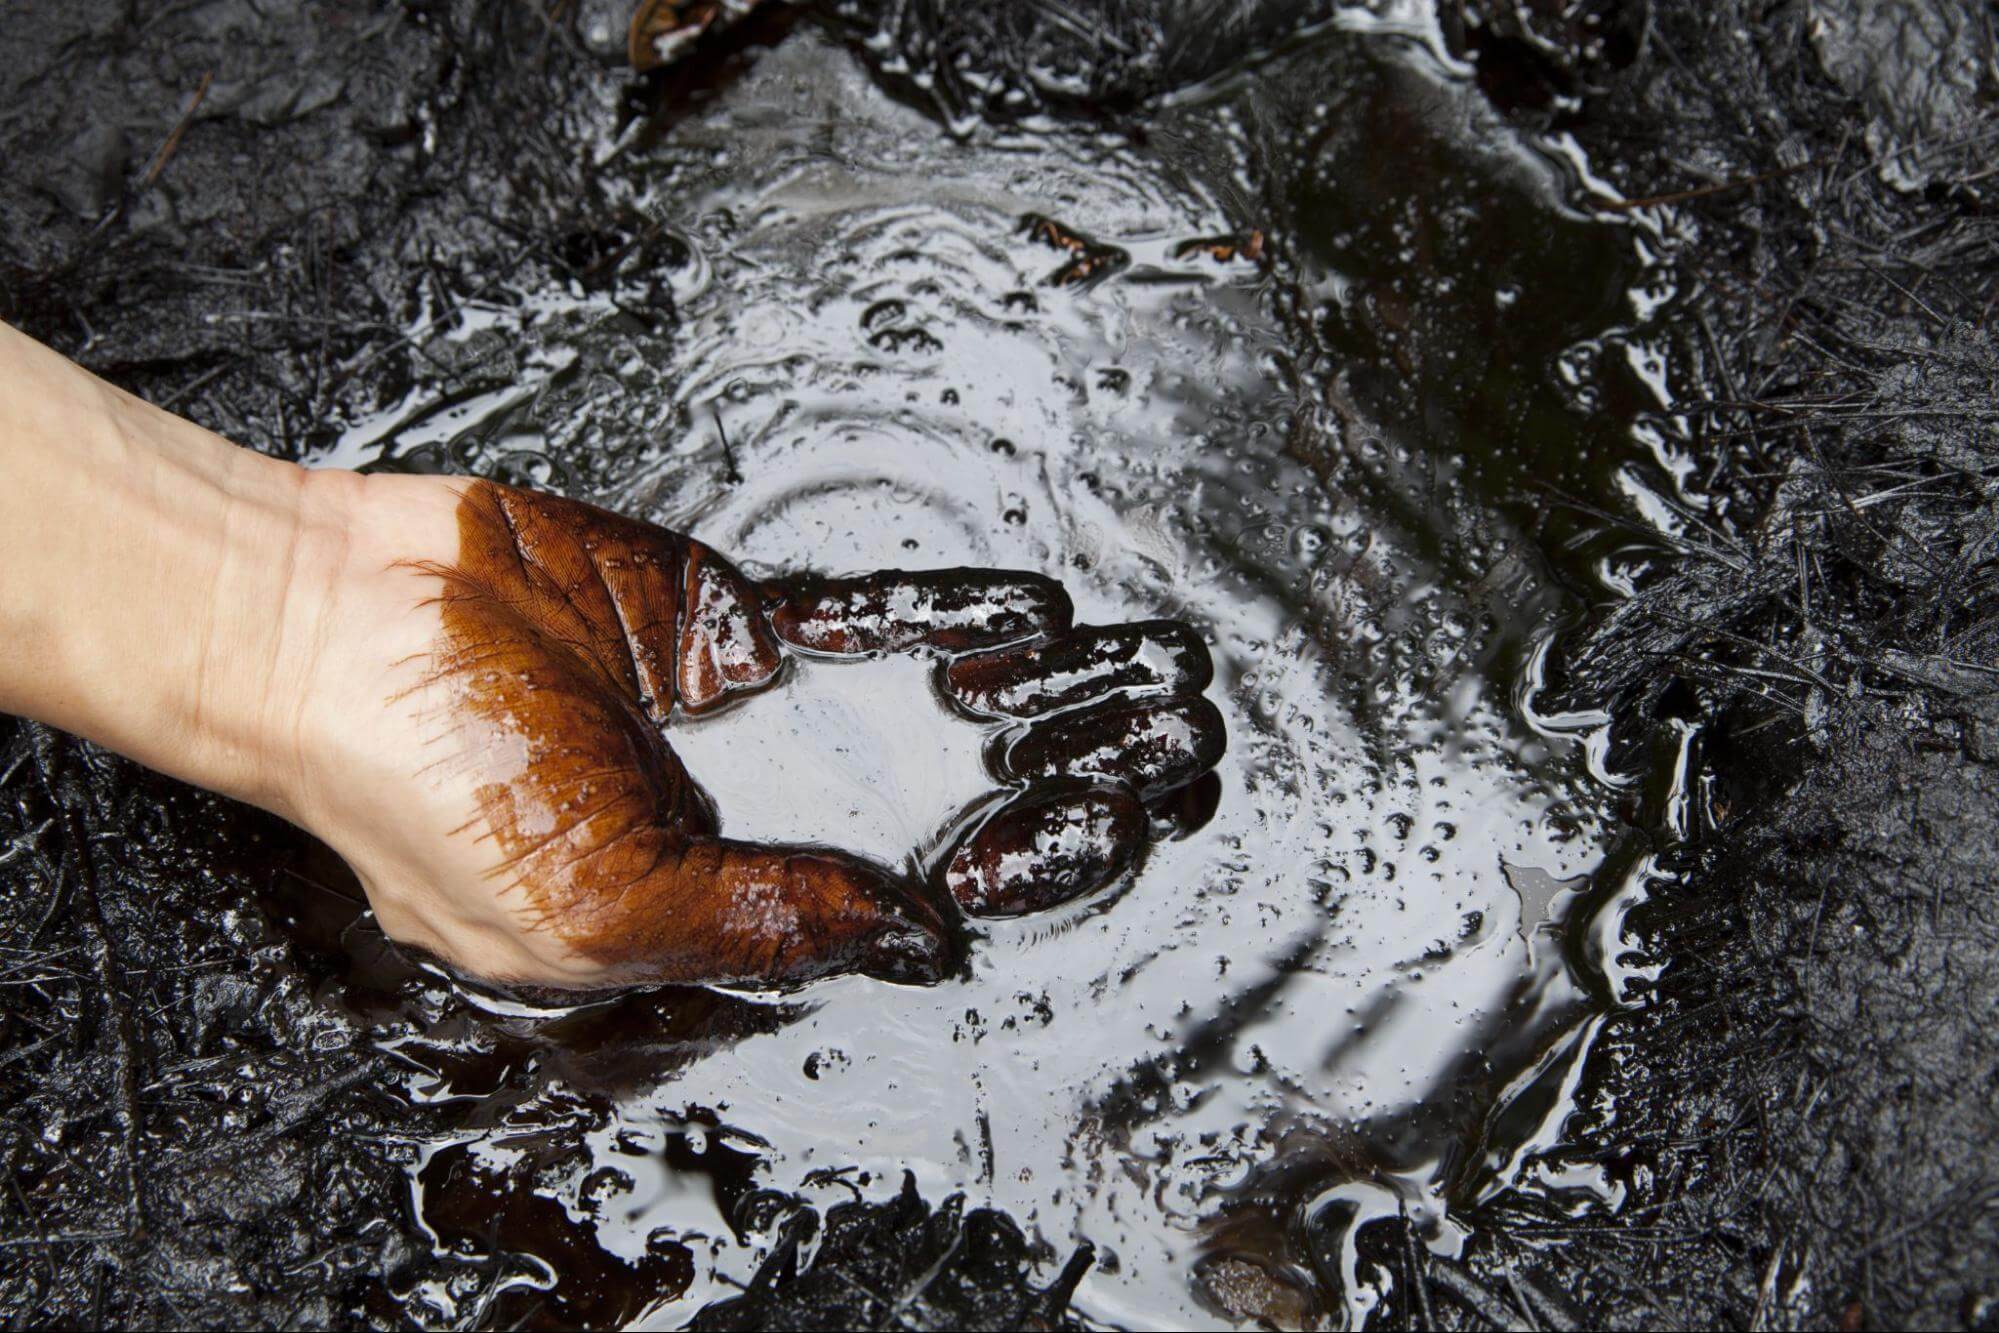 Close-up of a hand scooping up oil from an oil spill, representing the necessity for pollution liability insurance